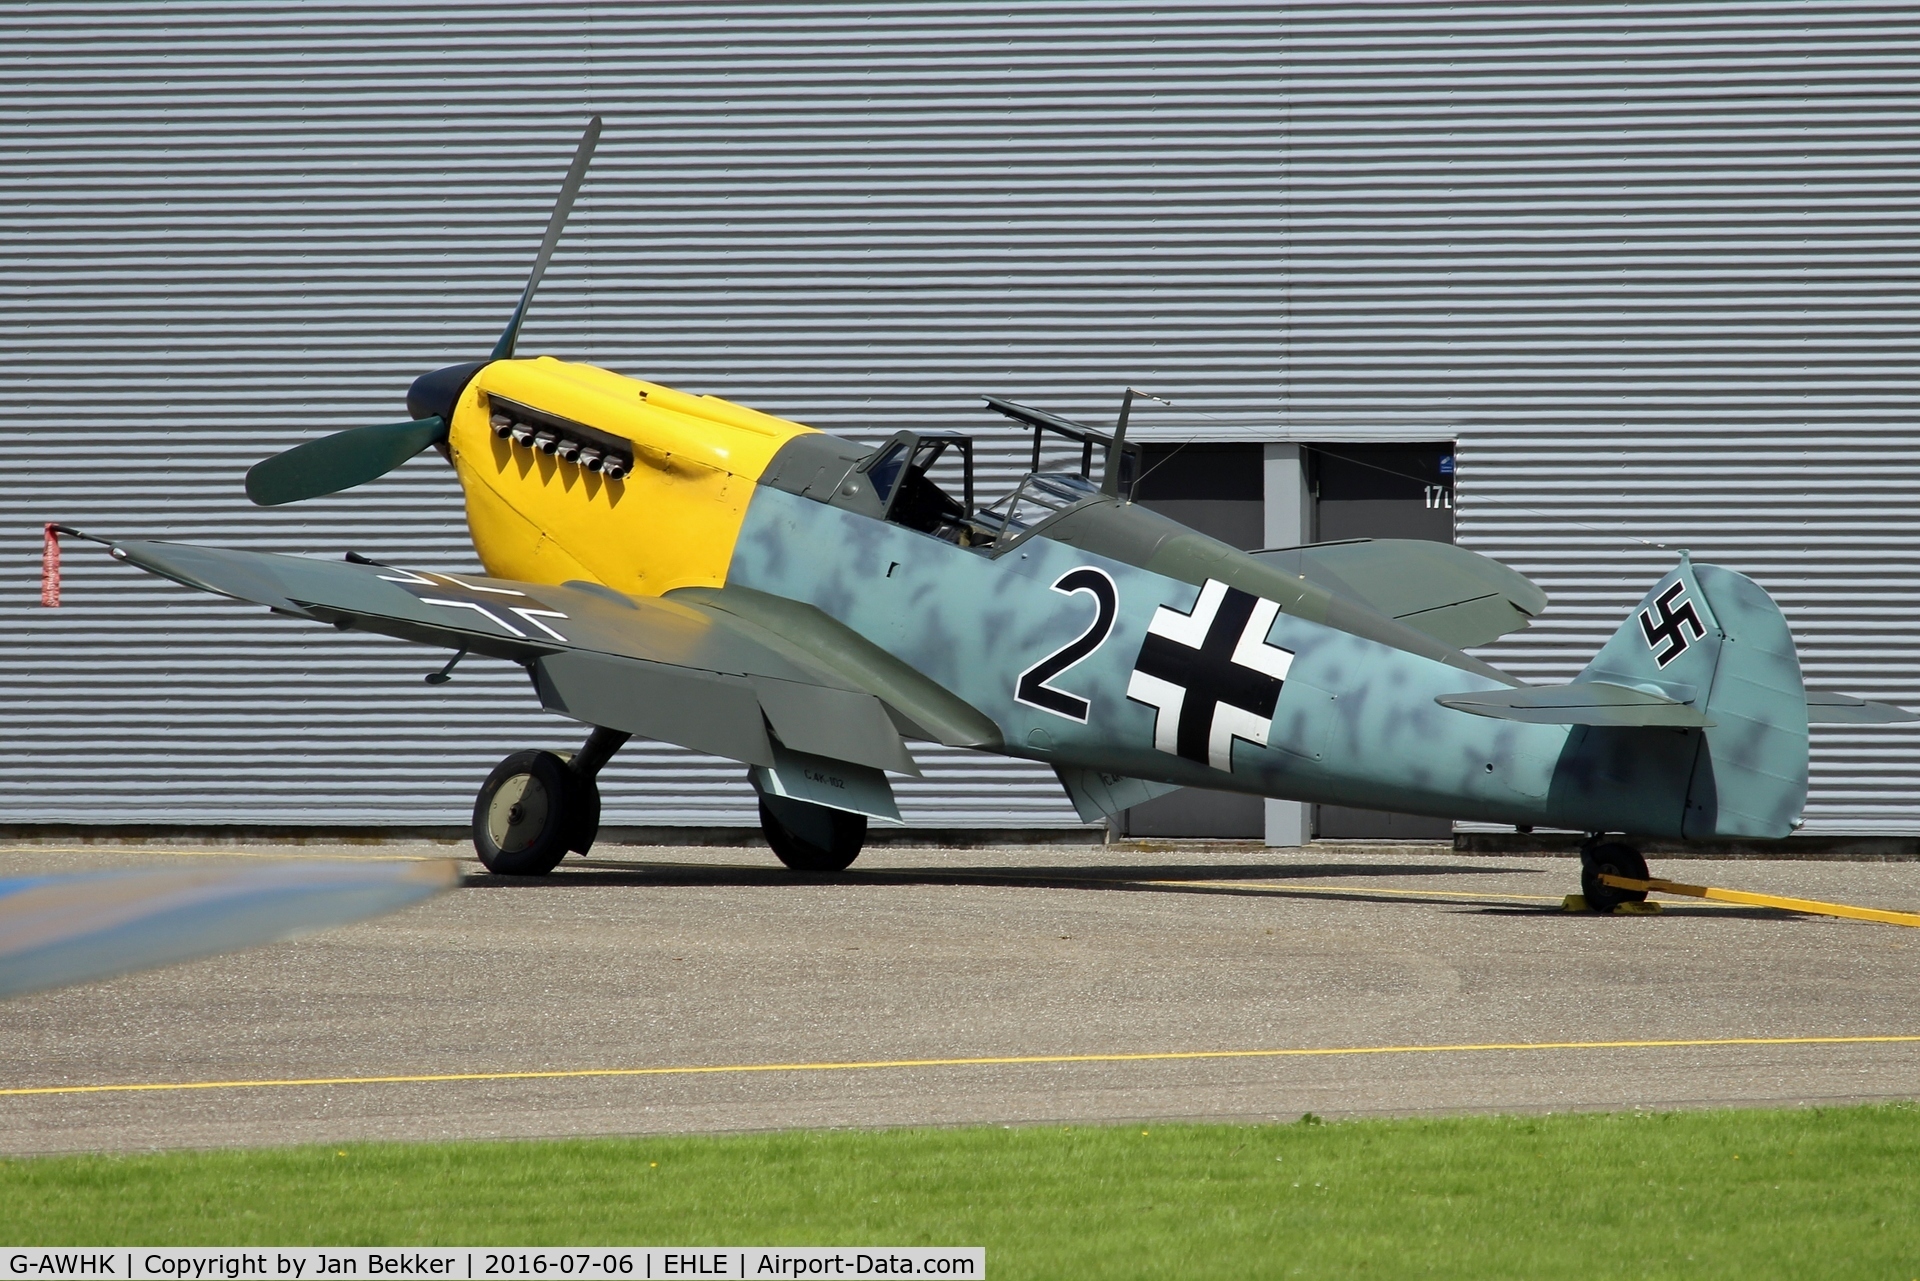 G-AWHK, 1949 Hispano HA-1112-M1L Buchon C/N 172, At Lelystad Airport for performing in the movie Dunkirk